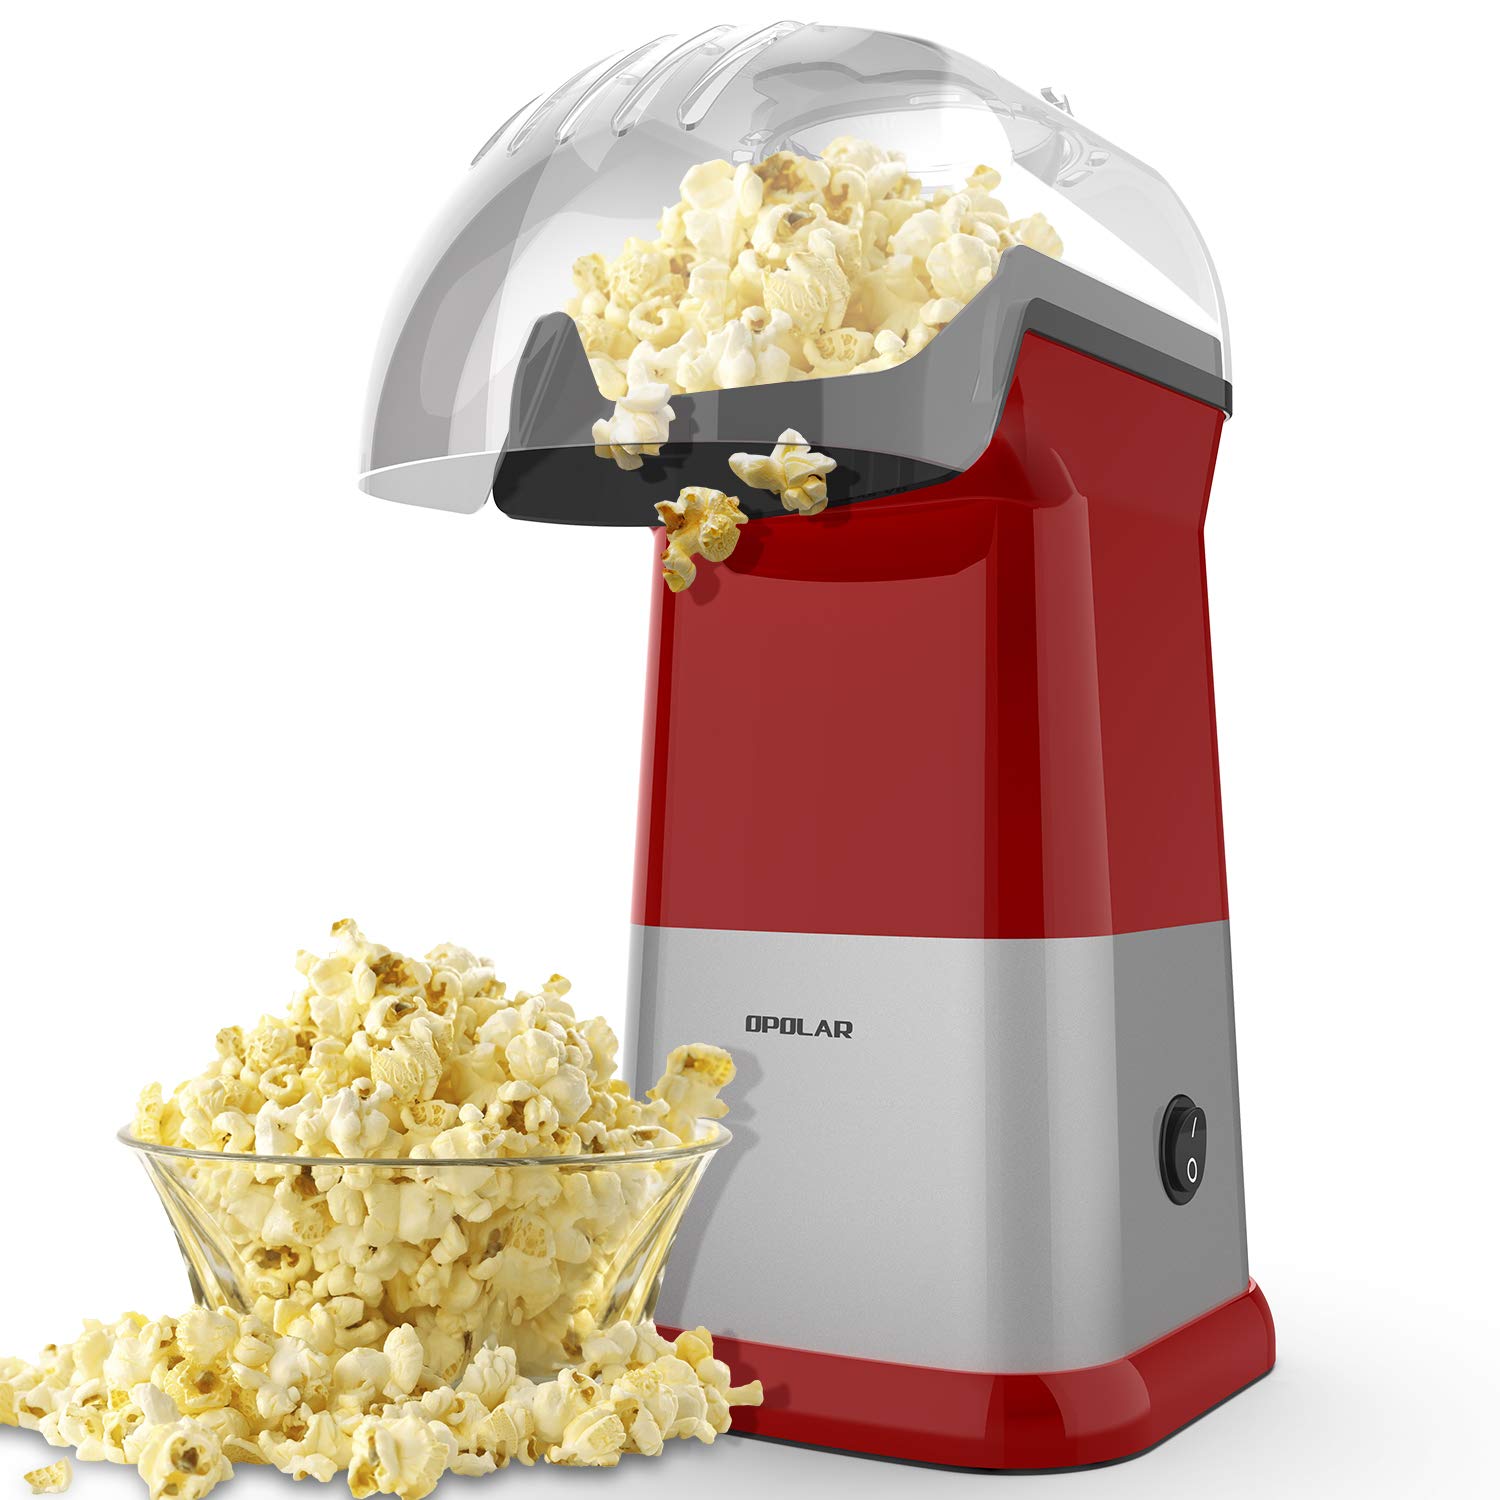 Use a hot air popper for the fluffiest low calorie popcorn! No oil